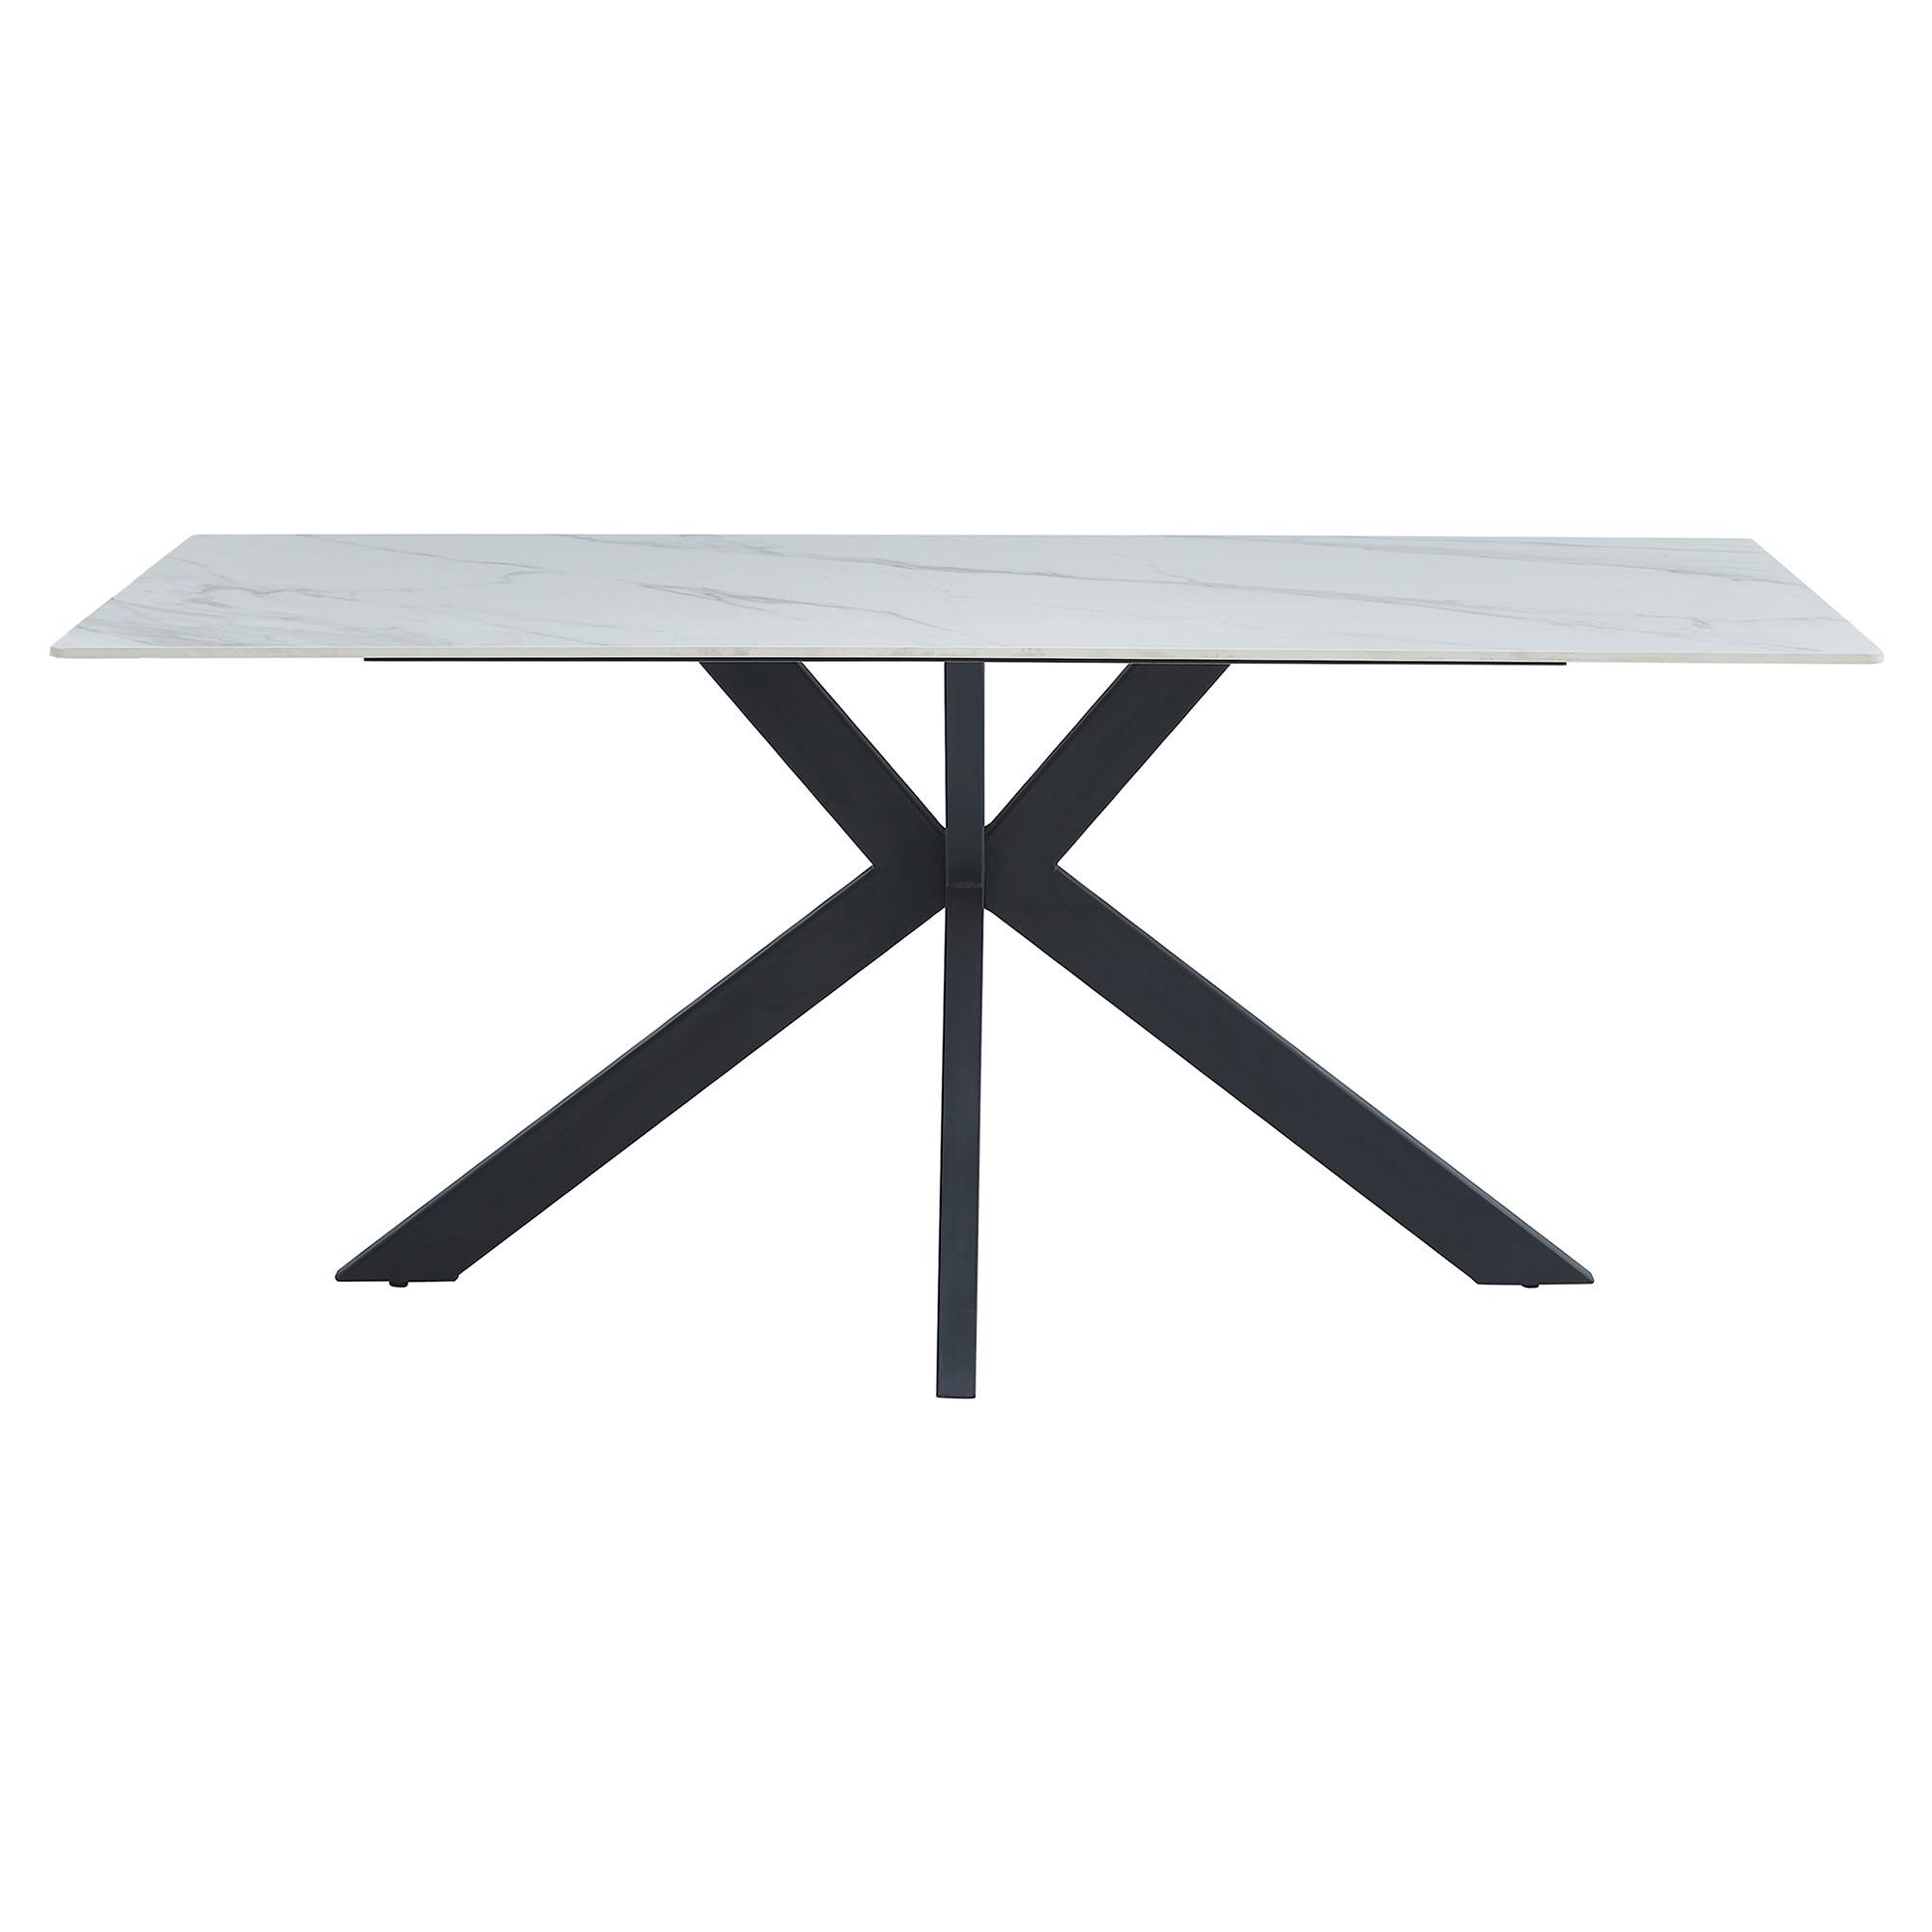 Delway Ceramic Top Dining Table, 180cm, Snow White